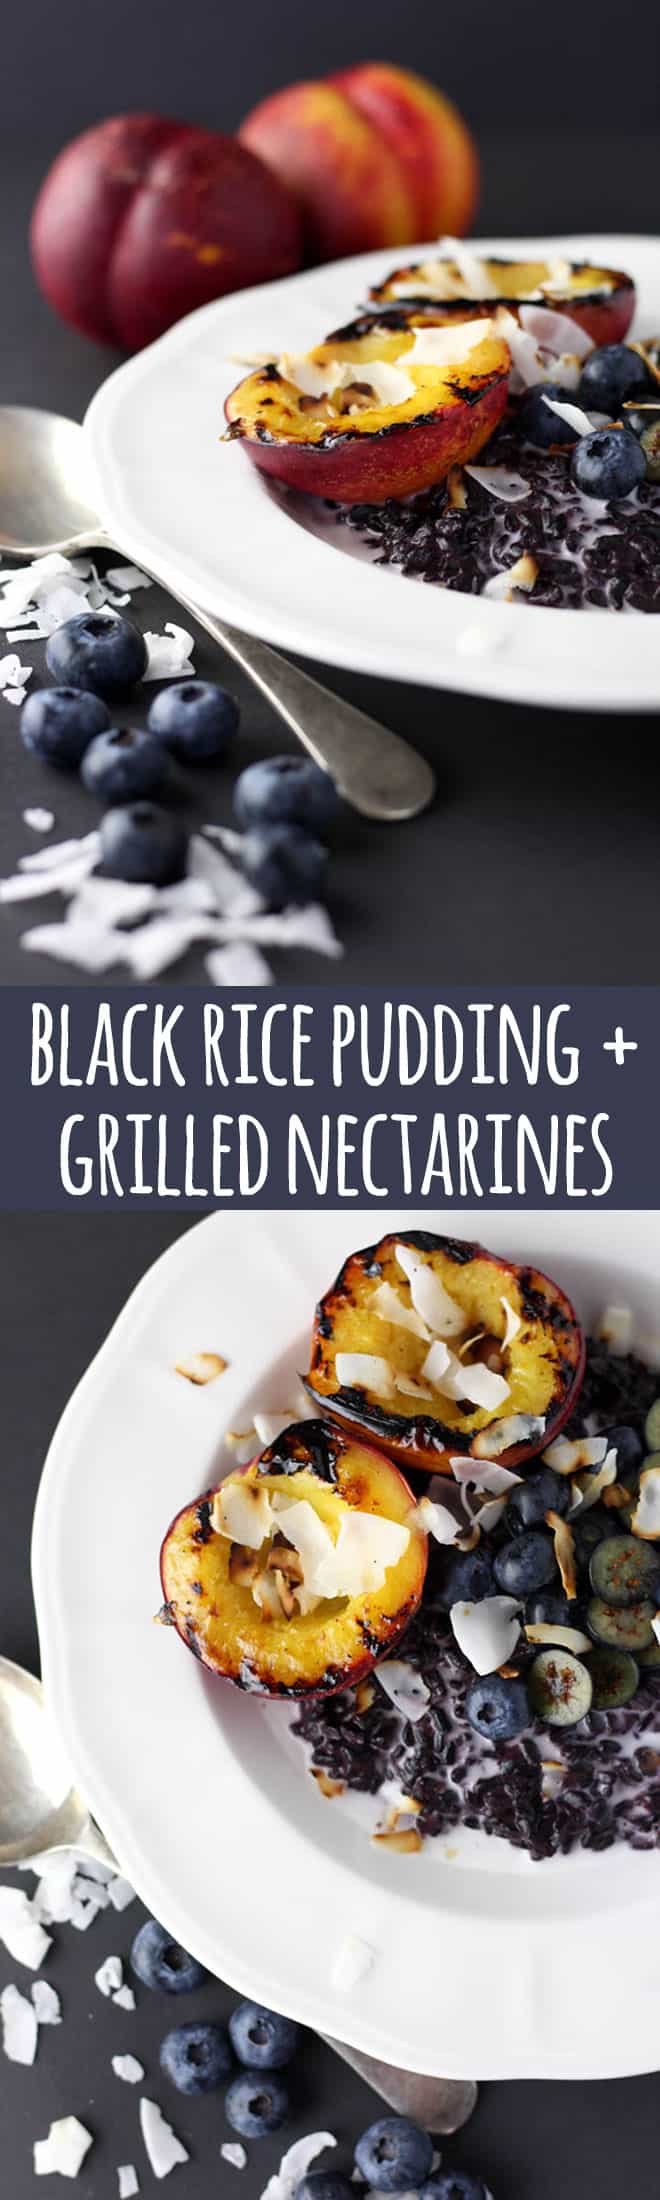 Black rice pudding with grilled nectarine. 